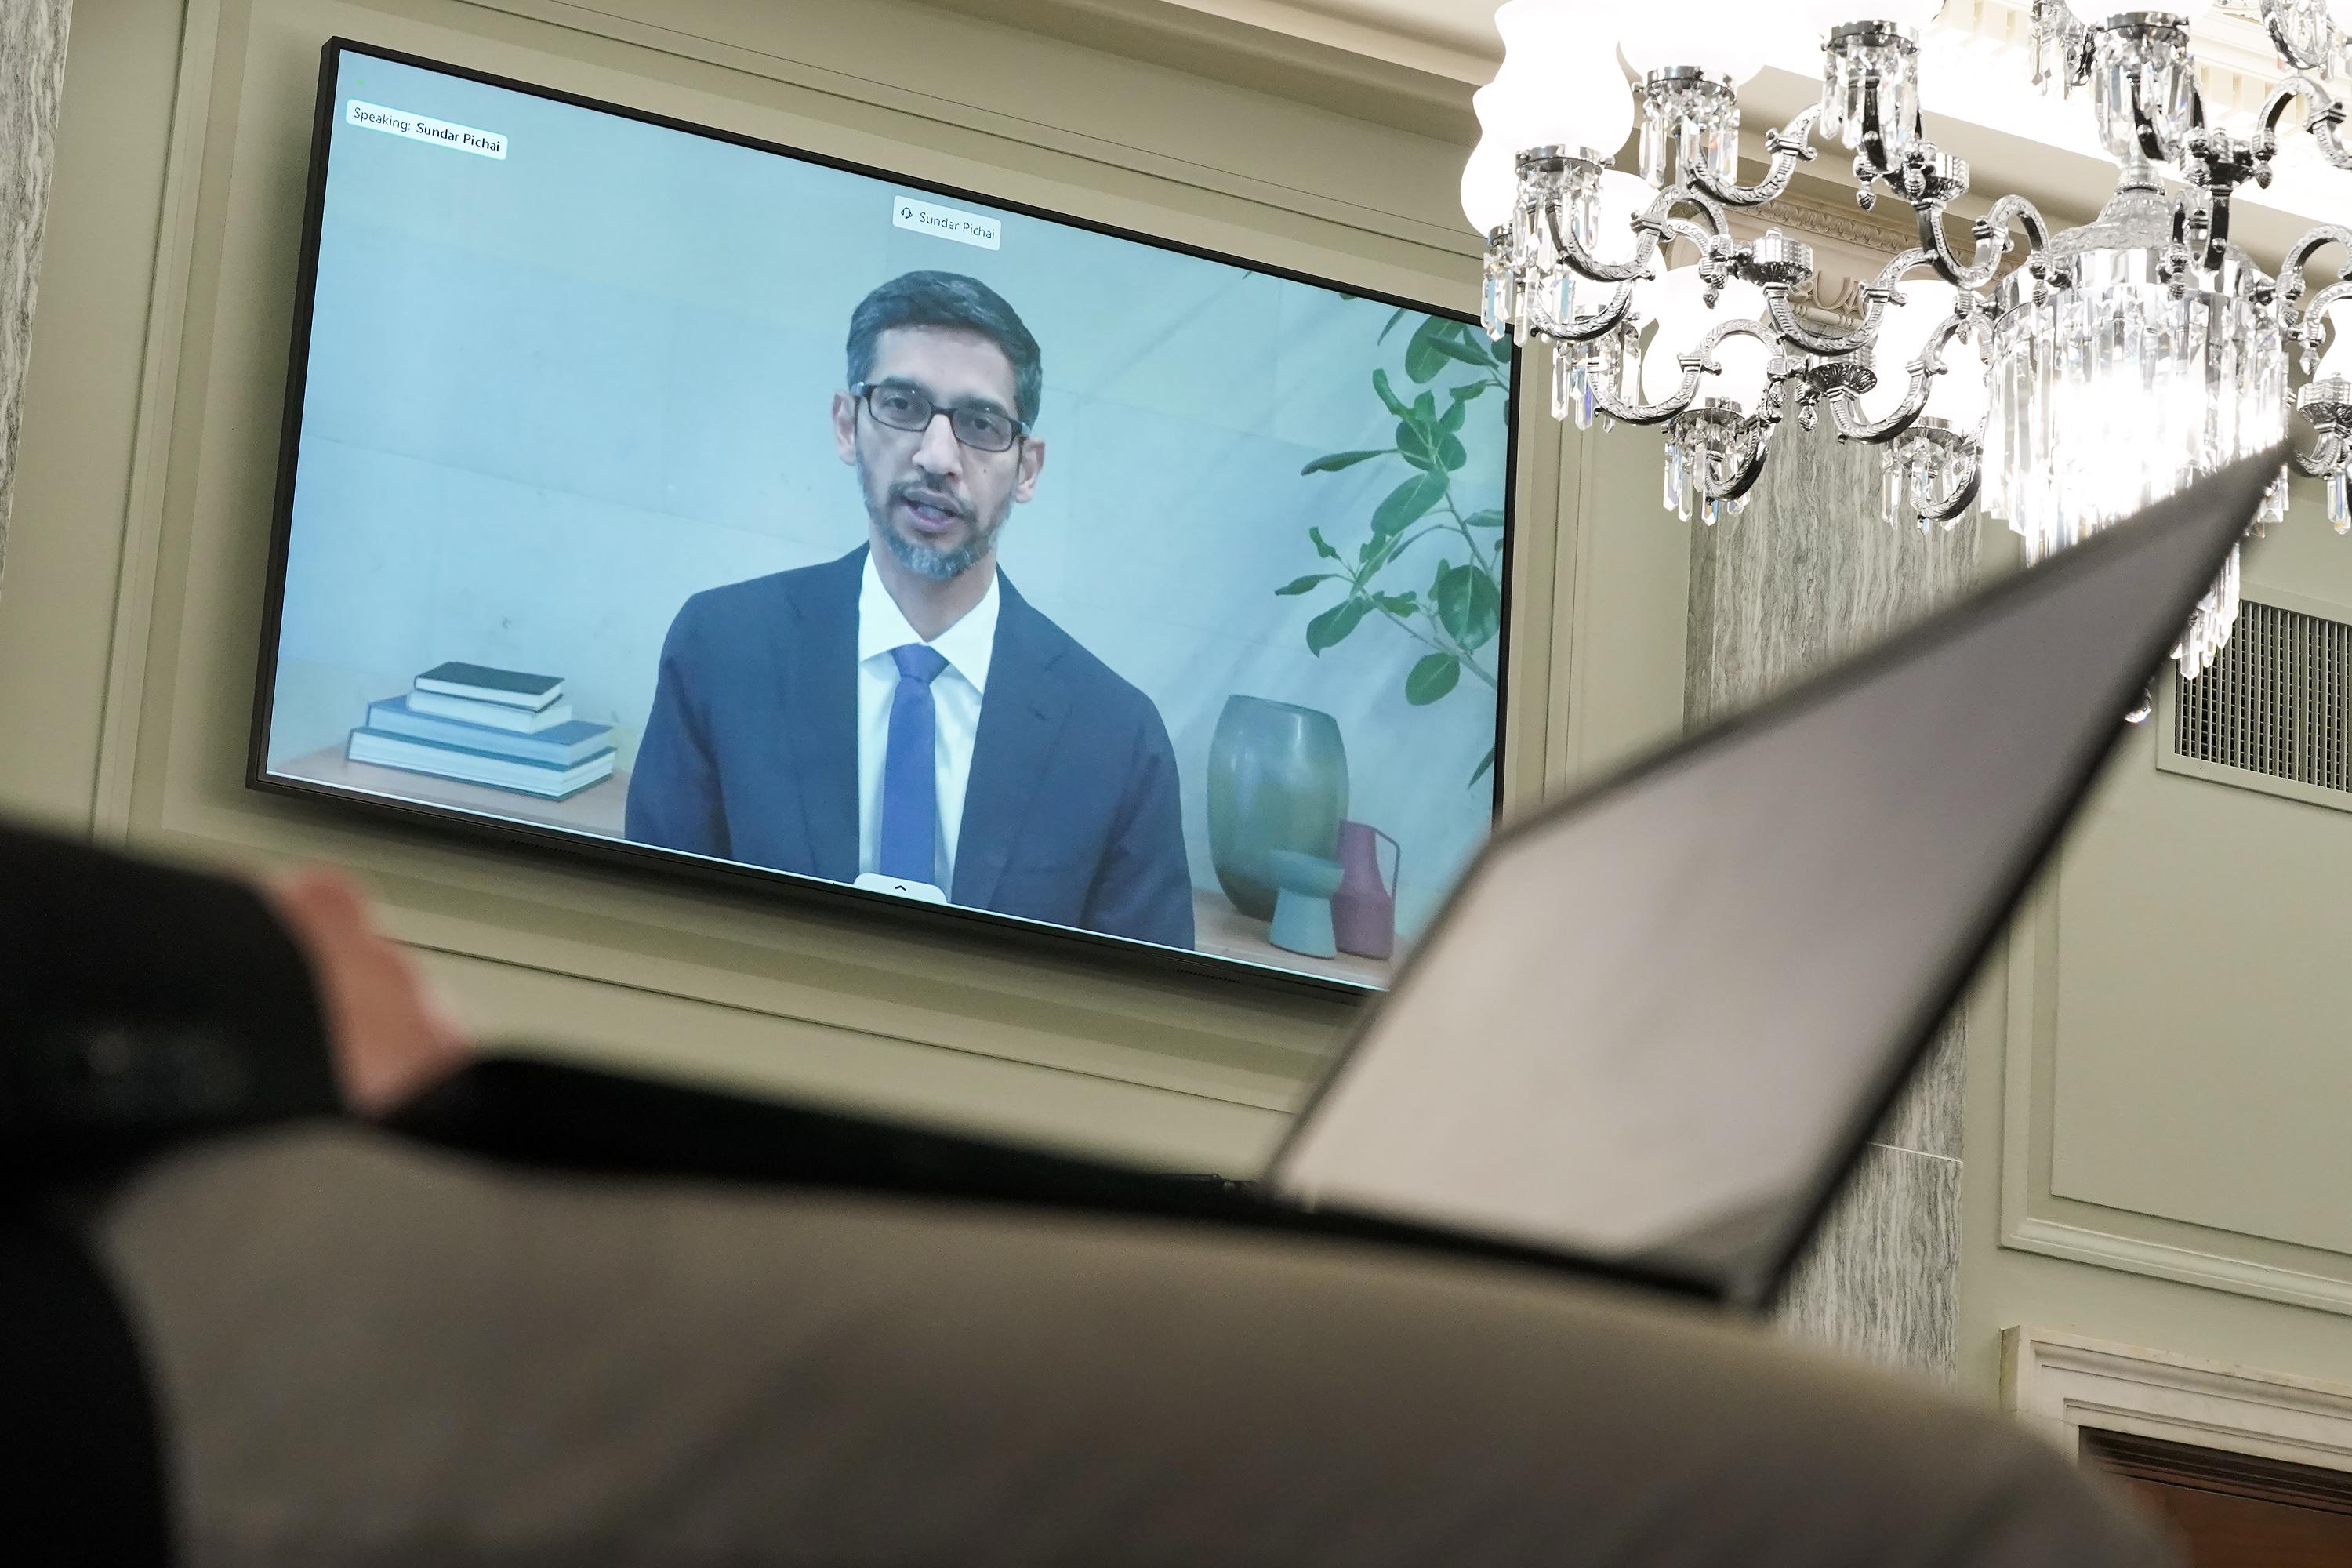 A person with a laptop is in the foreground while Sundar Pichai is on a large screen on the wall.